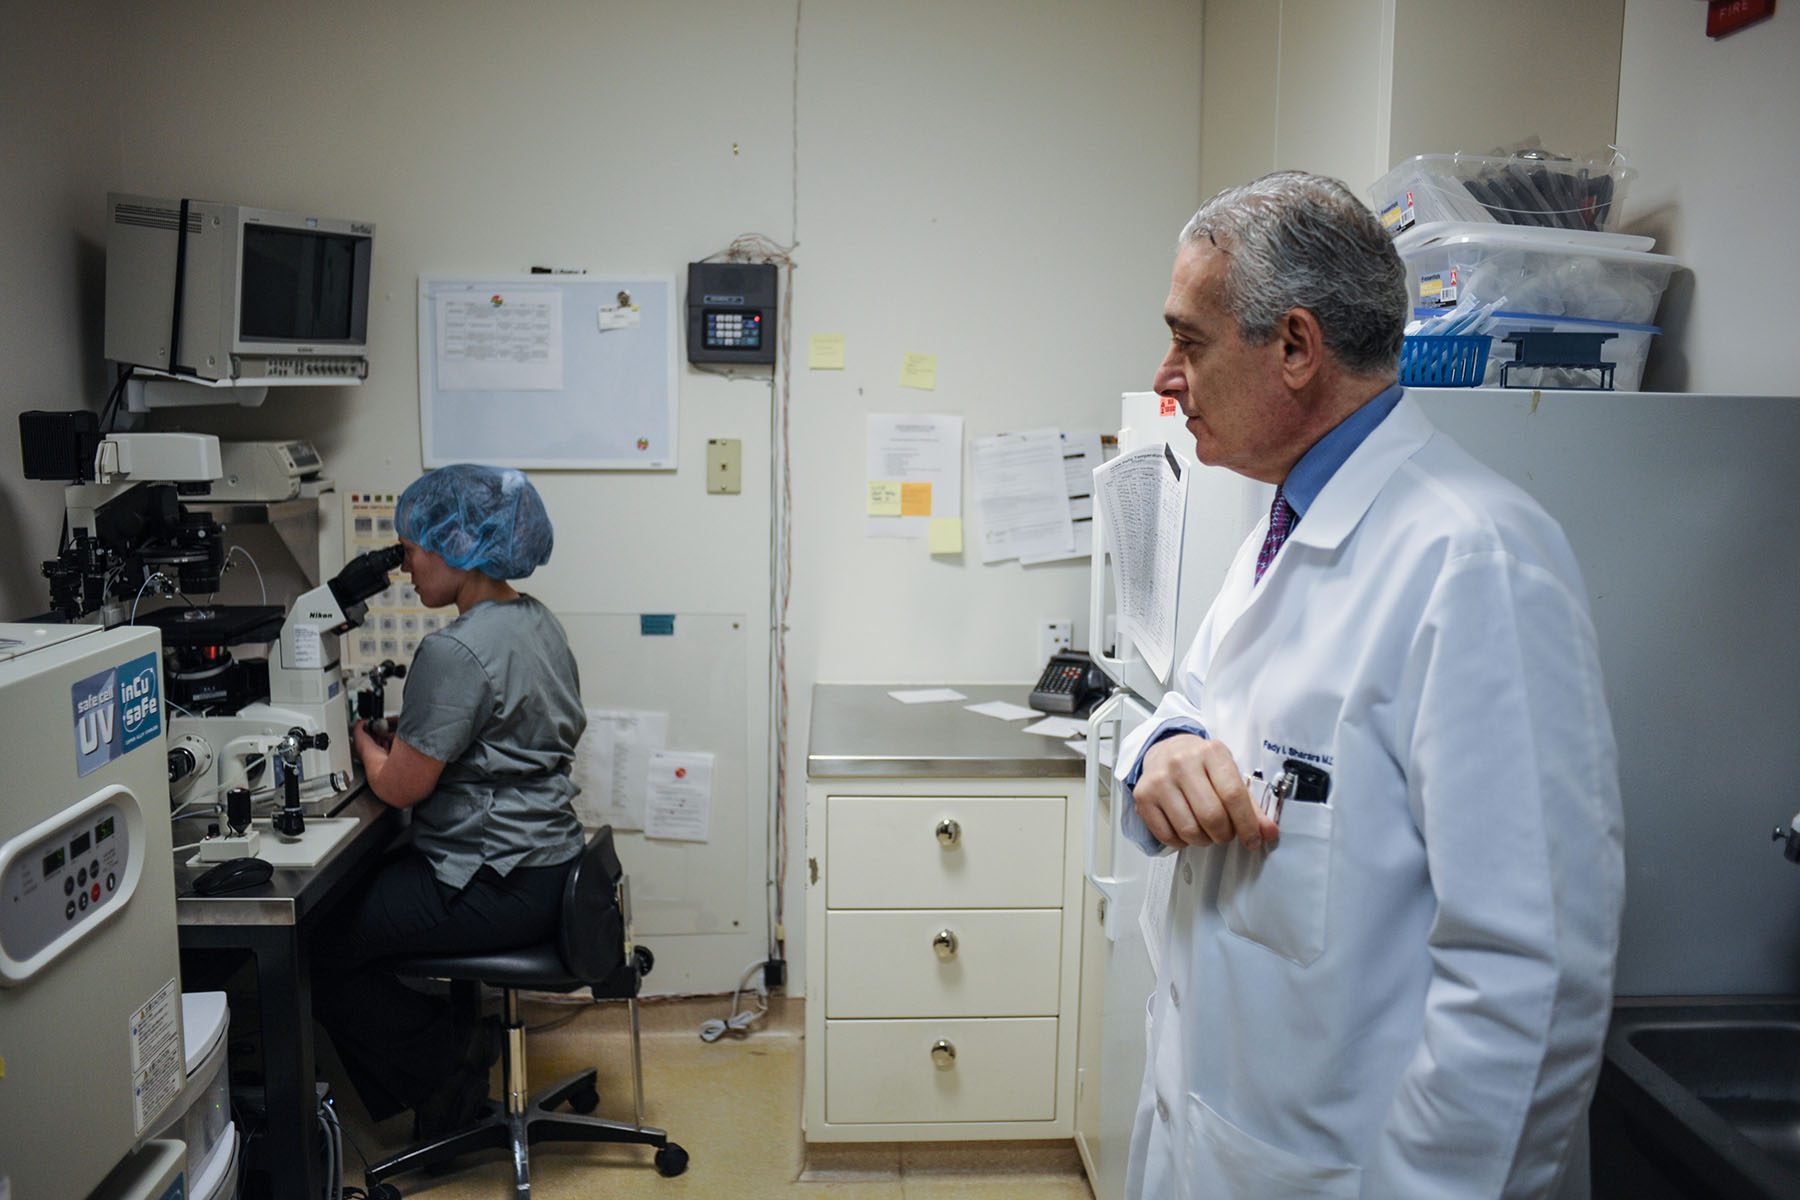 The Medical Director of Virginia Center for Reproductive Medicine watches an embryologist at work. She is looking through a microscope. He is standing a few feet back.